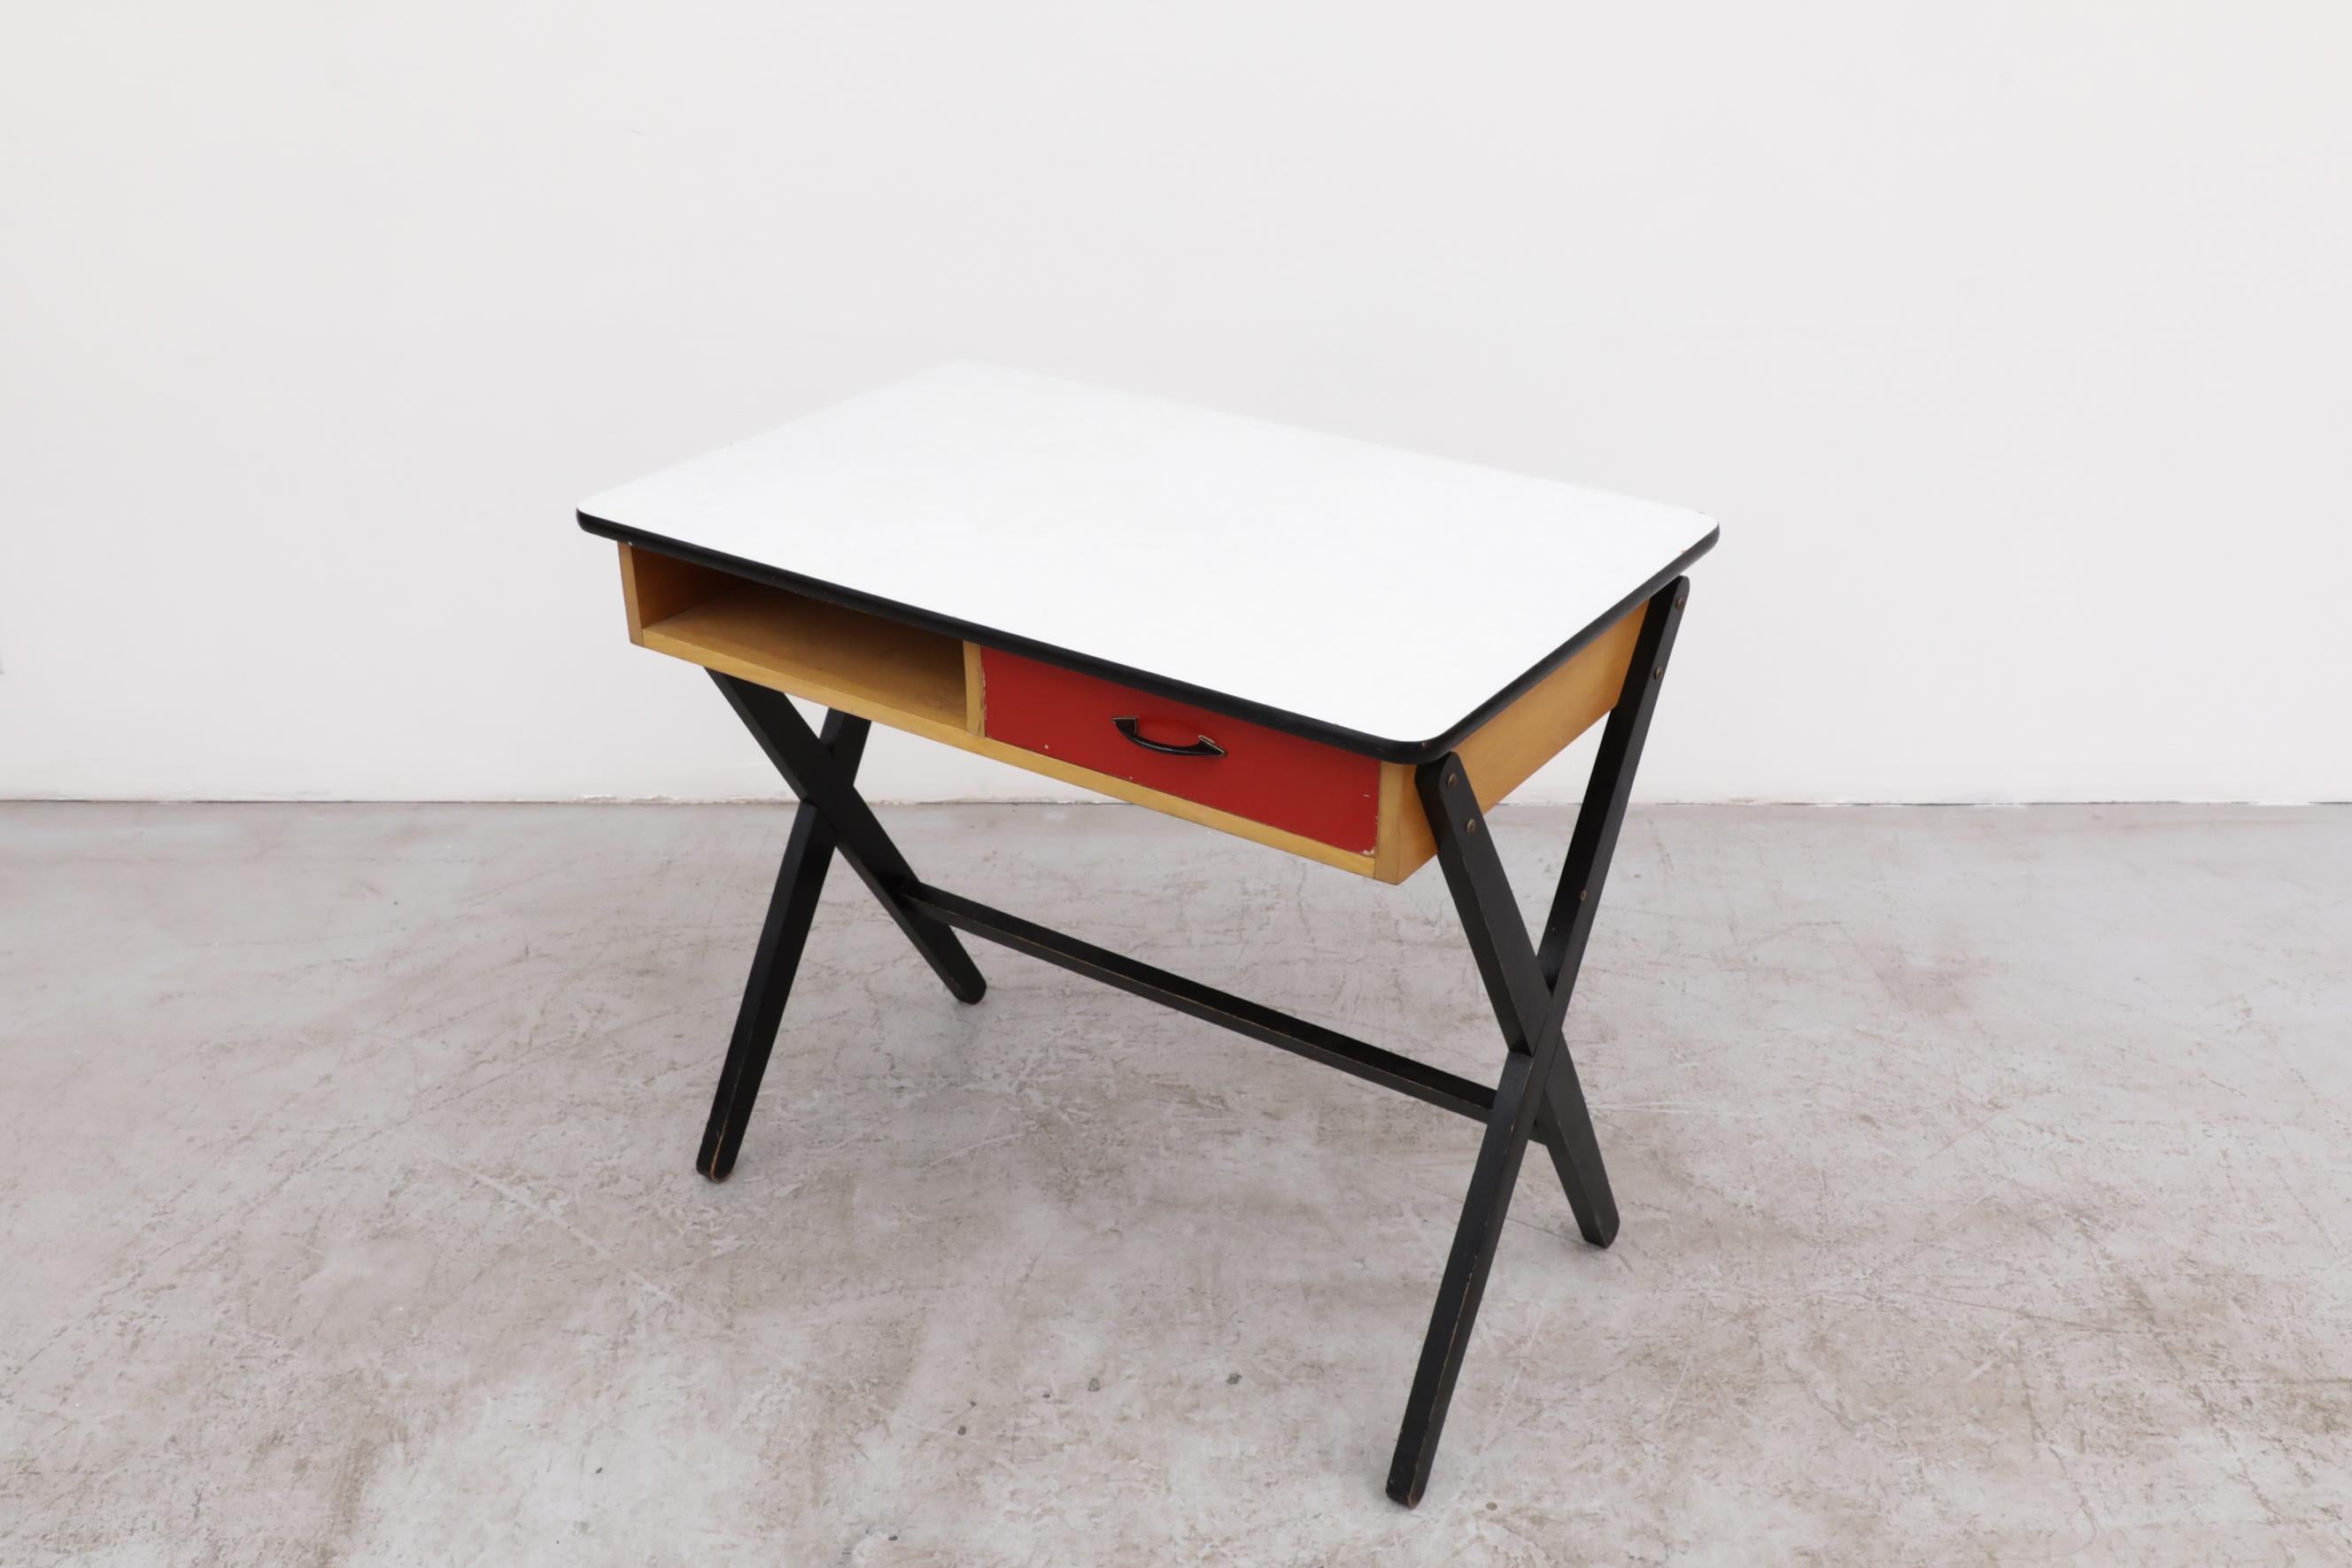 1954 Coen de Vries Desk in Birch w/ Ebony Base, Red Drawer and Formica Top For Sale 8